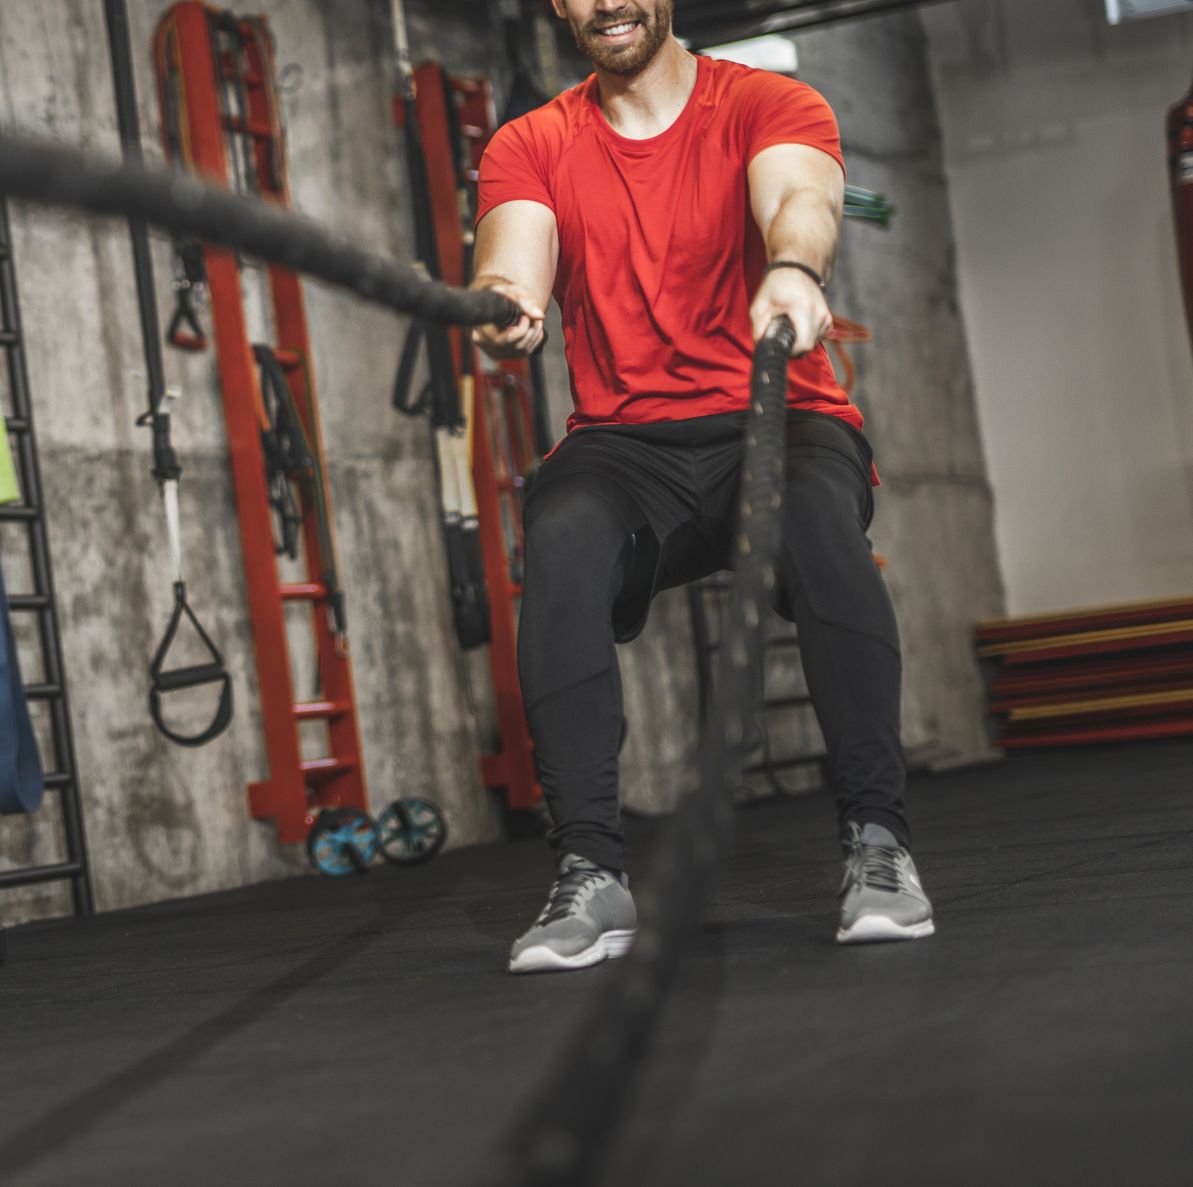 Battle Ropes Aren't a Strength Solution for Your Workouts. Here's How to Use Them Right.